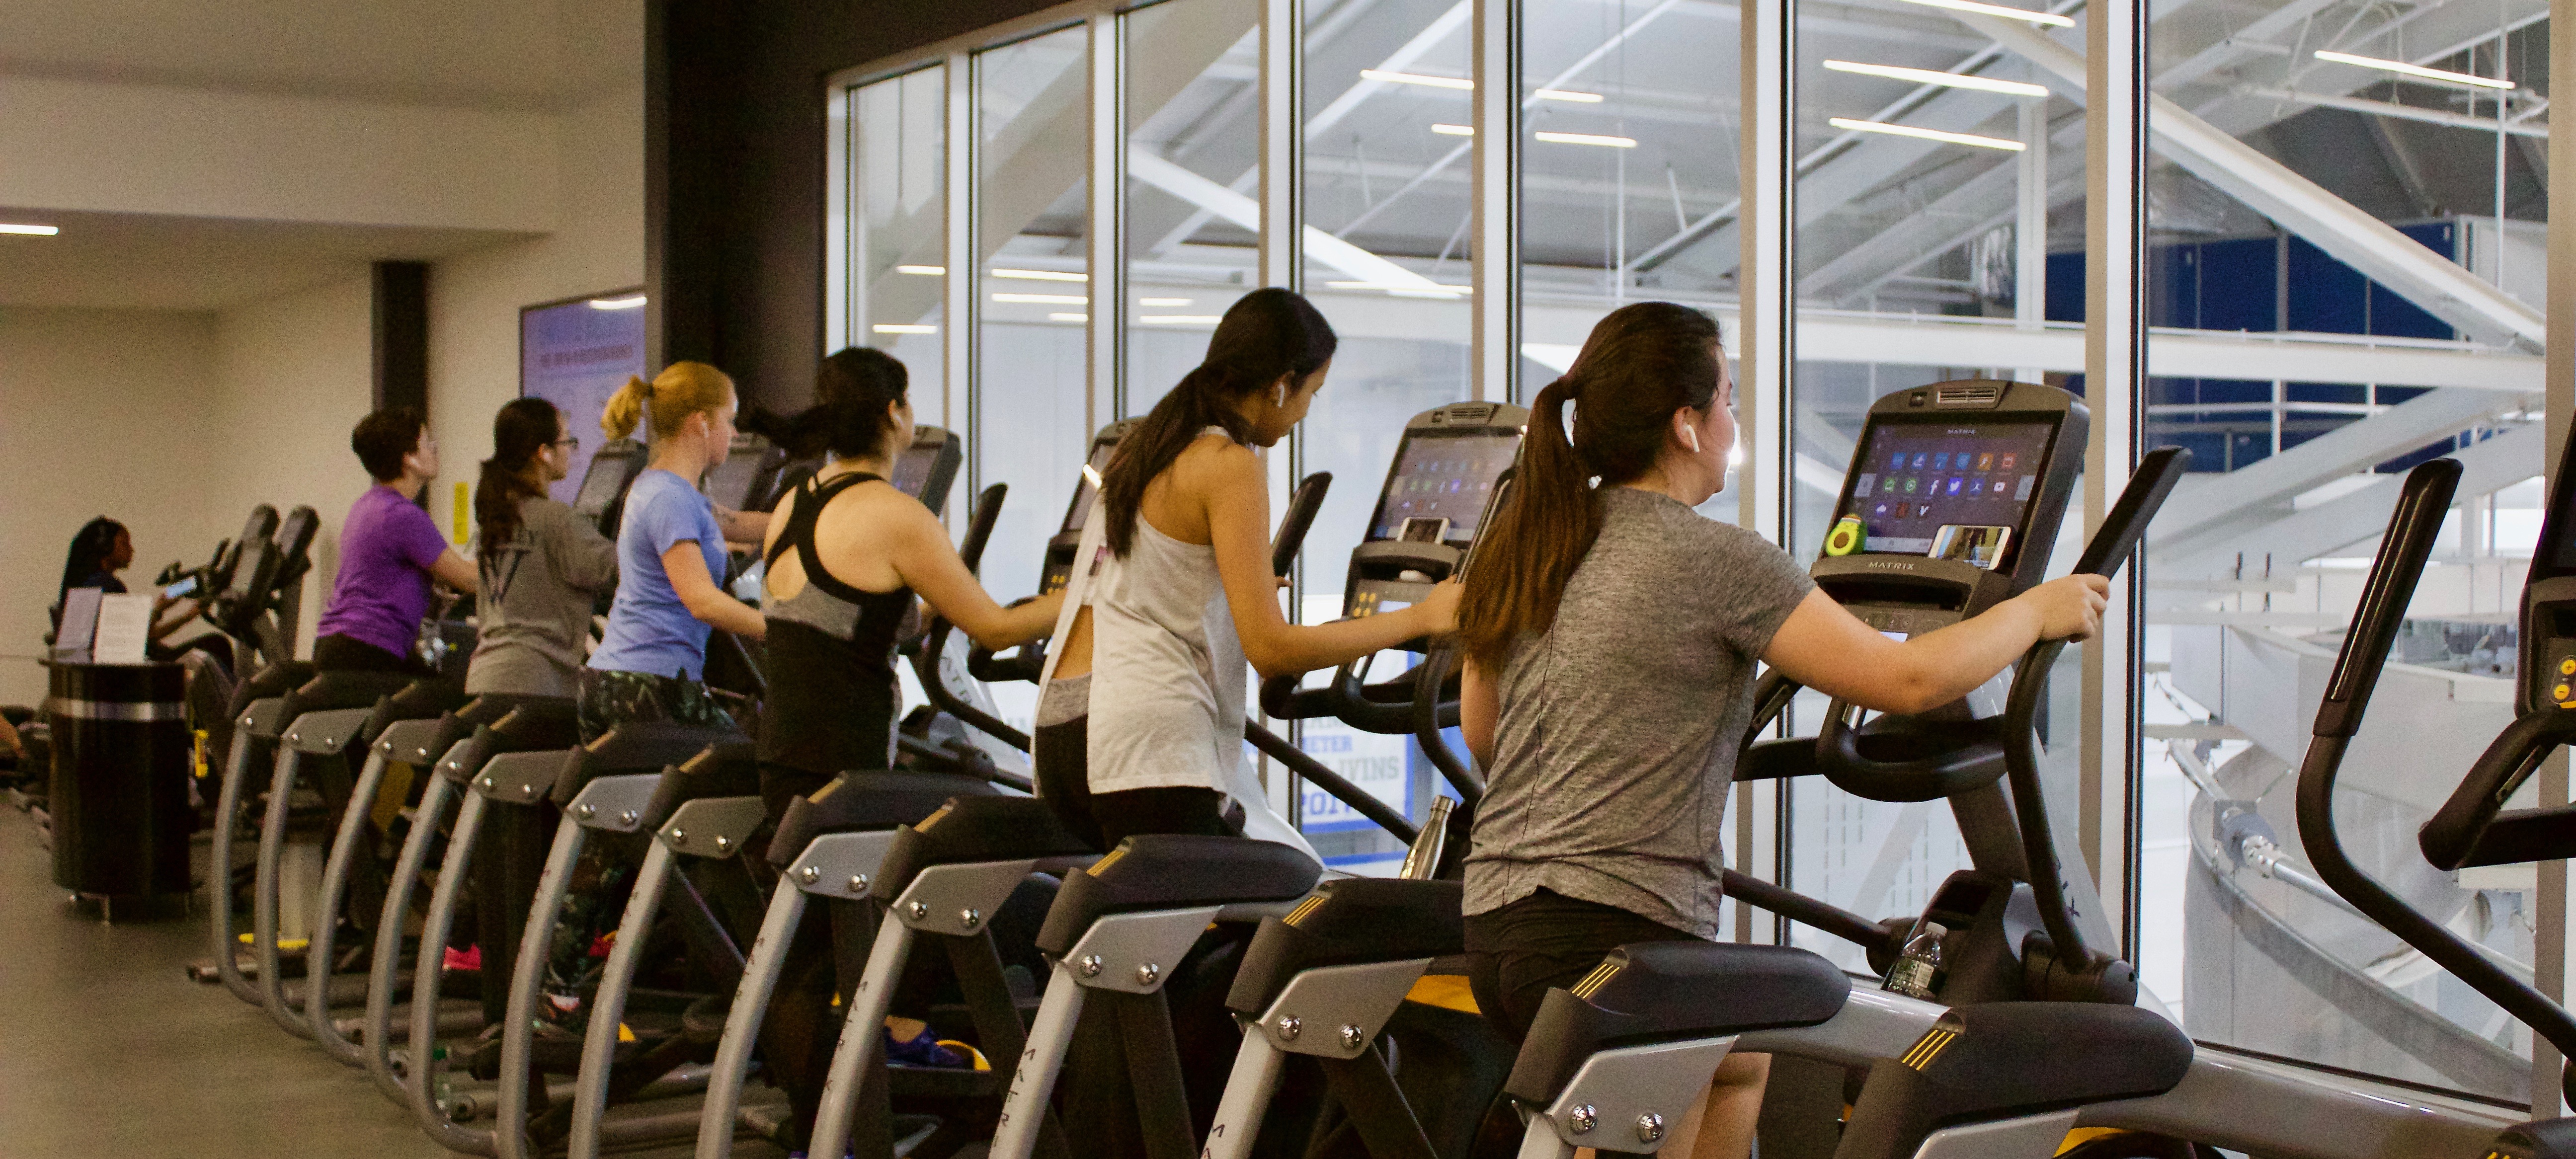 fitness center users on ellipticals 